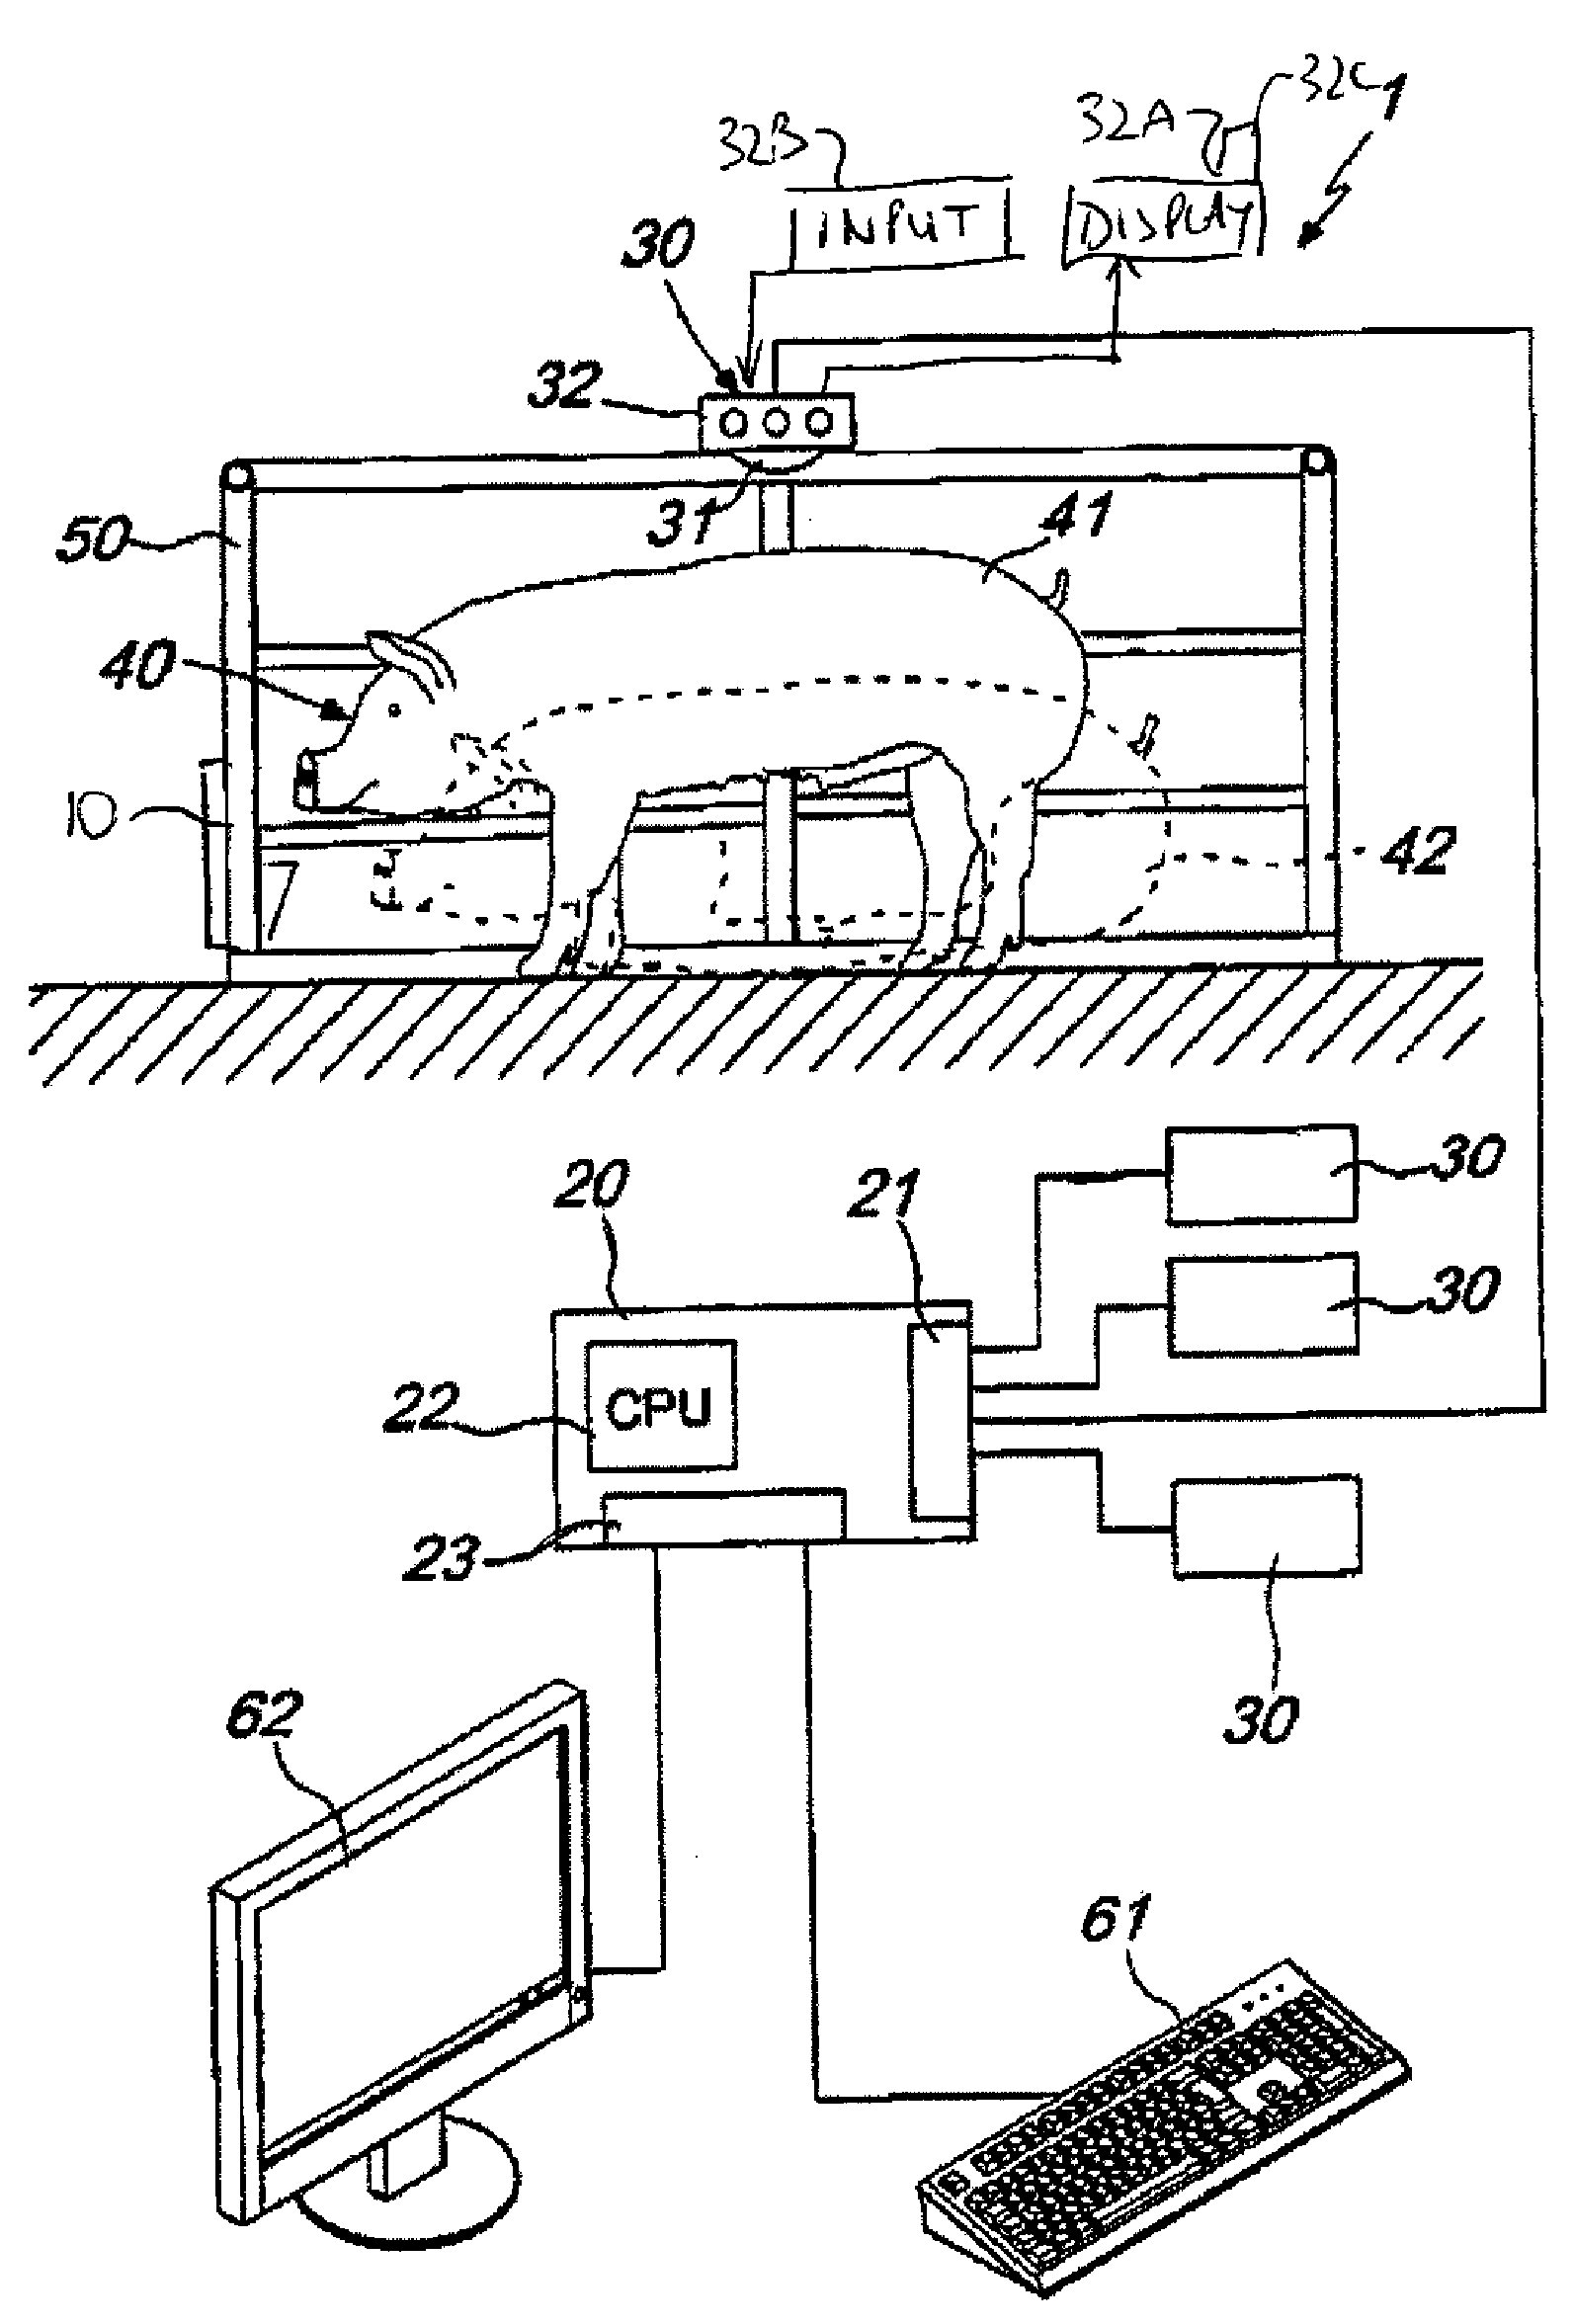 Method for monitoring estrus, ovulation of animals, for planning a useful fertilization time zone and a preferred fertilization time zone